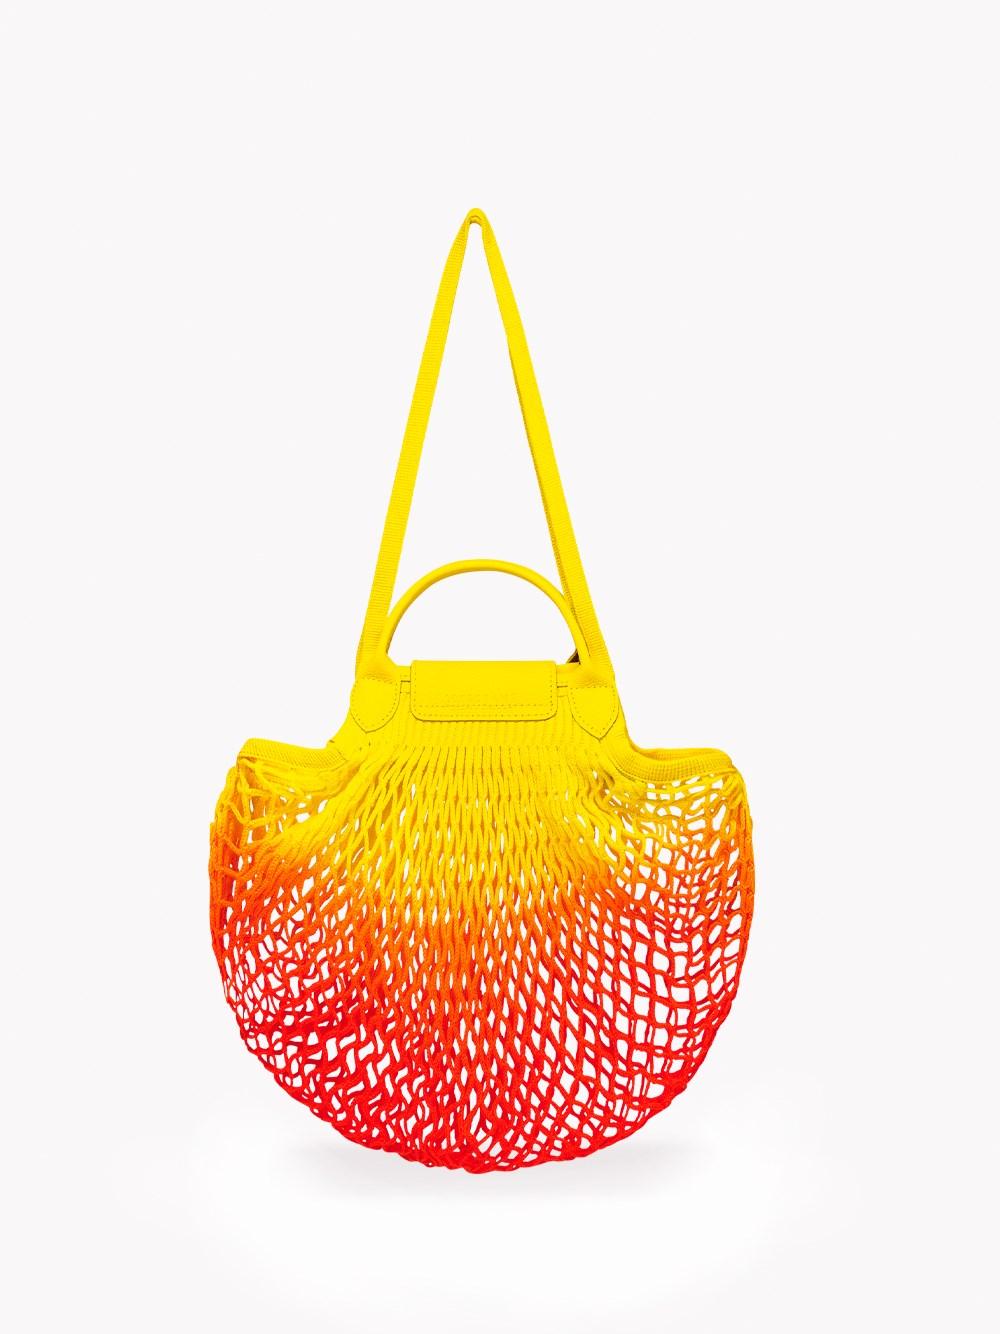 Longchamp `le Pliage Filet Tie And Dye` Net Top Handle Bag in Yellow | Lyst